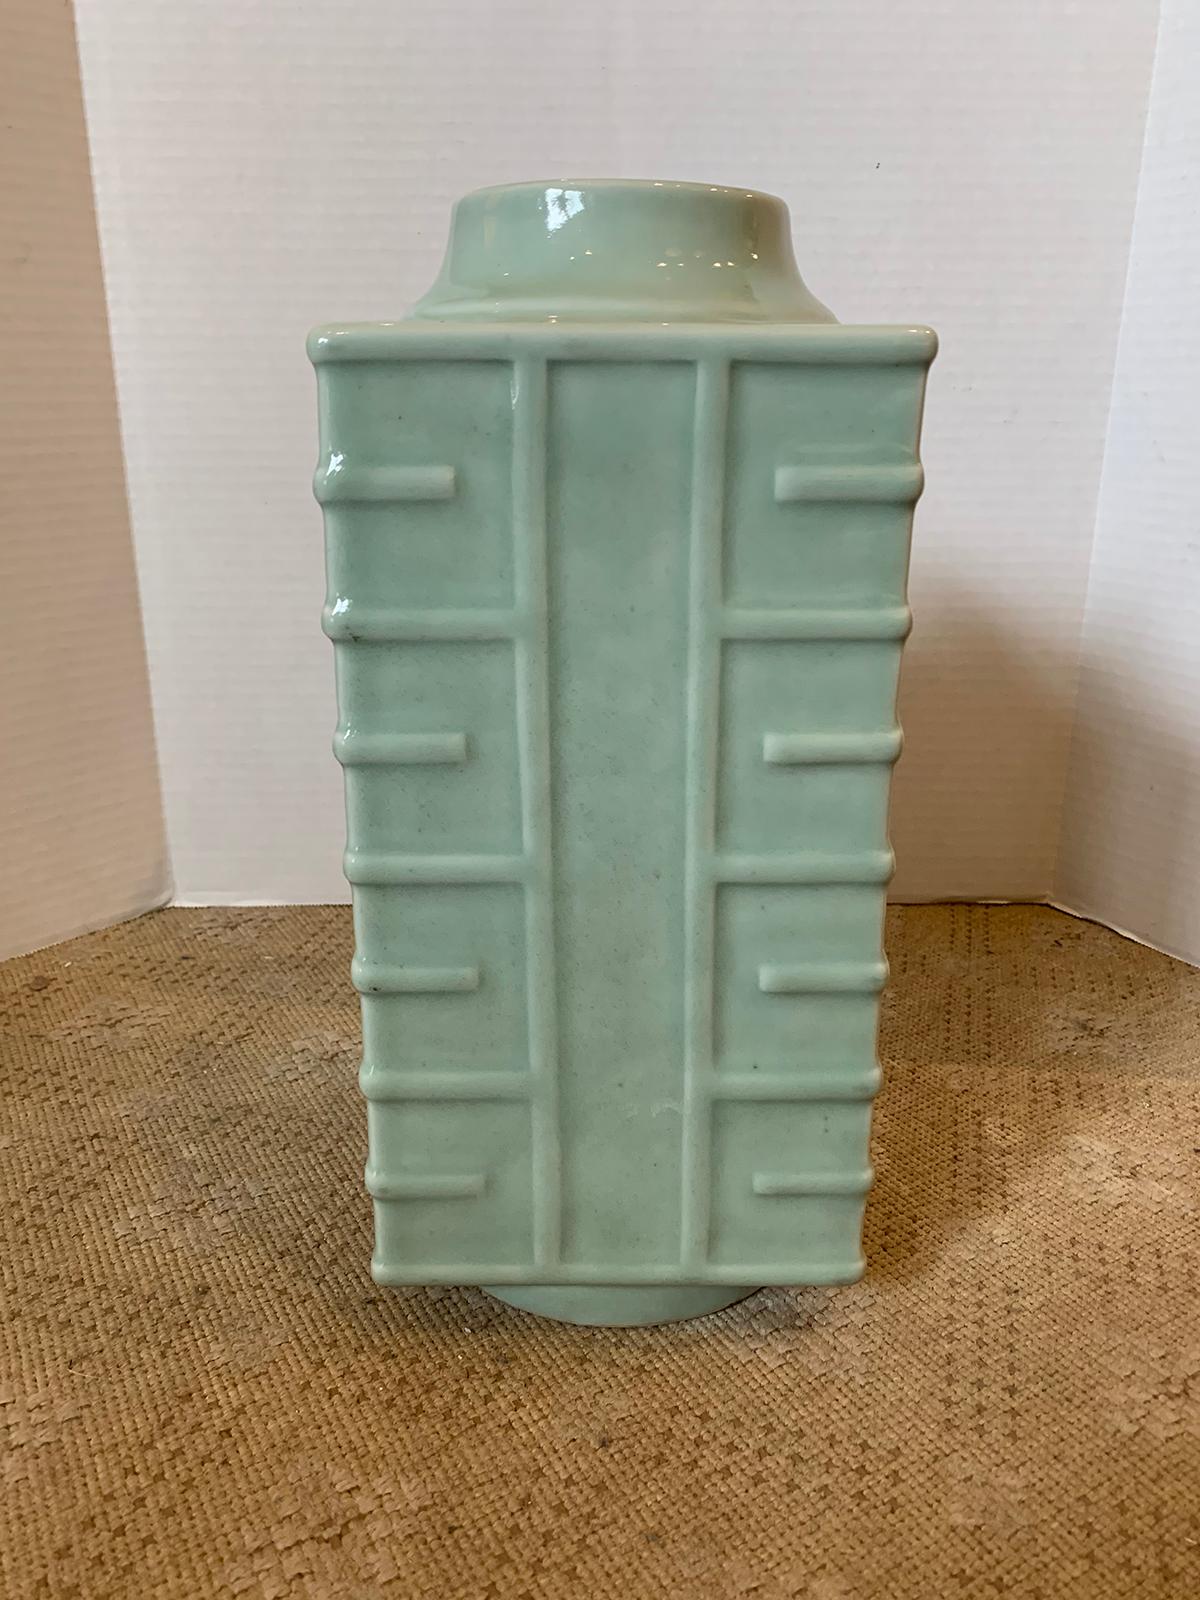 Late 19th-early 20th century glazed Celadon porcelain square cong form vase, unmarked.